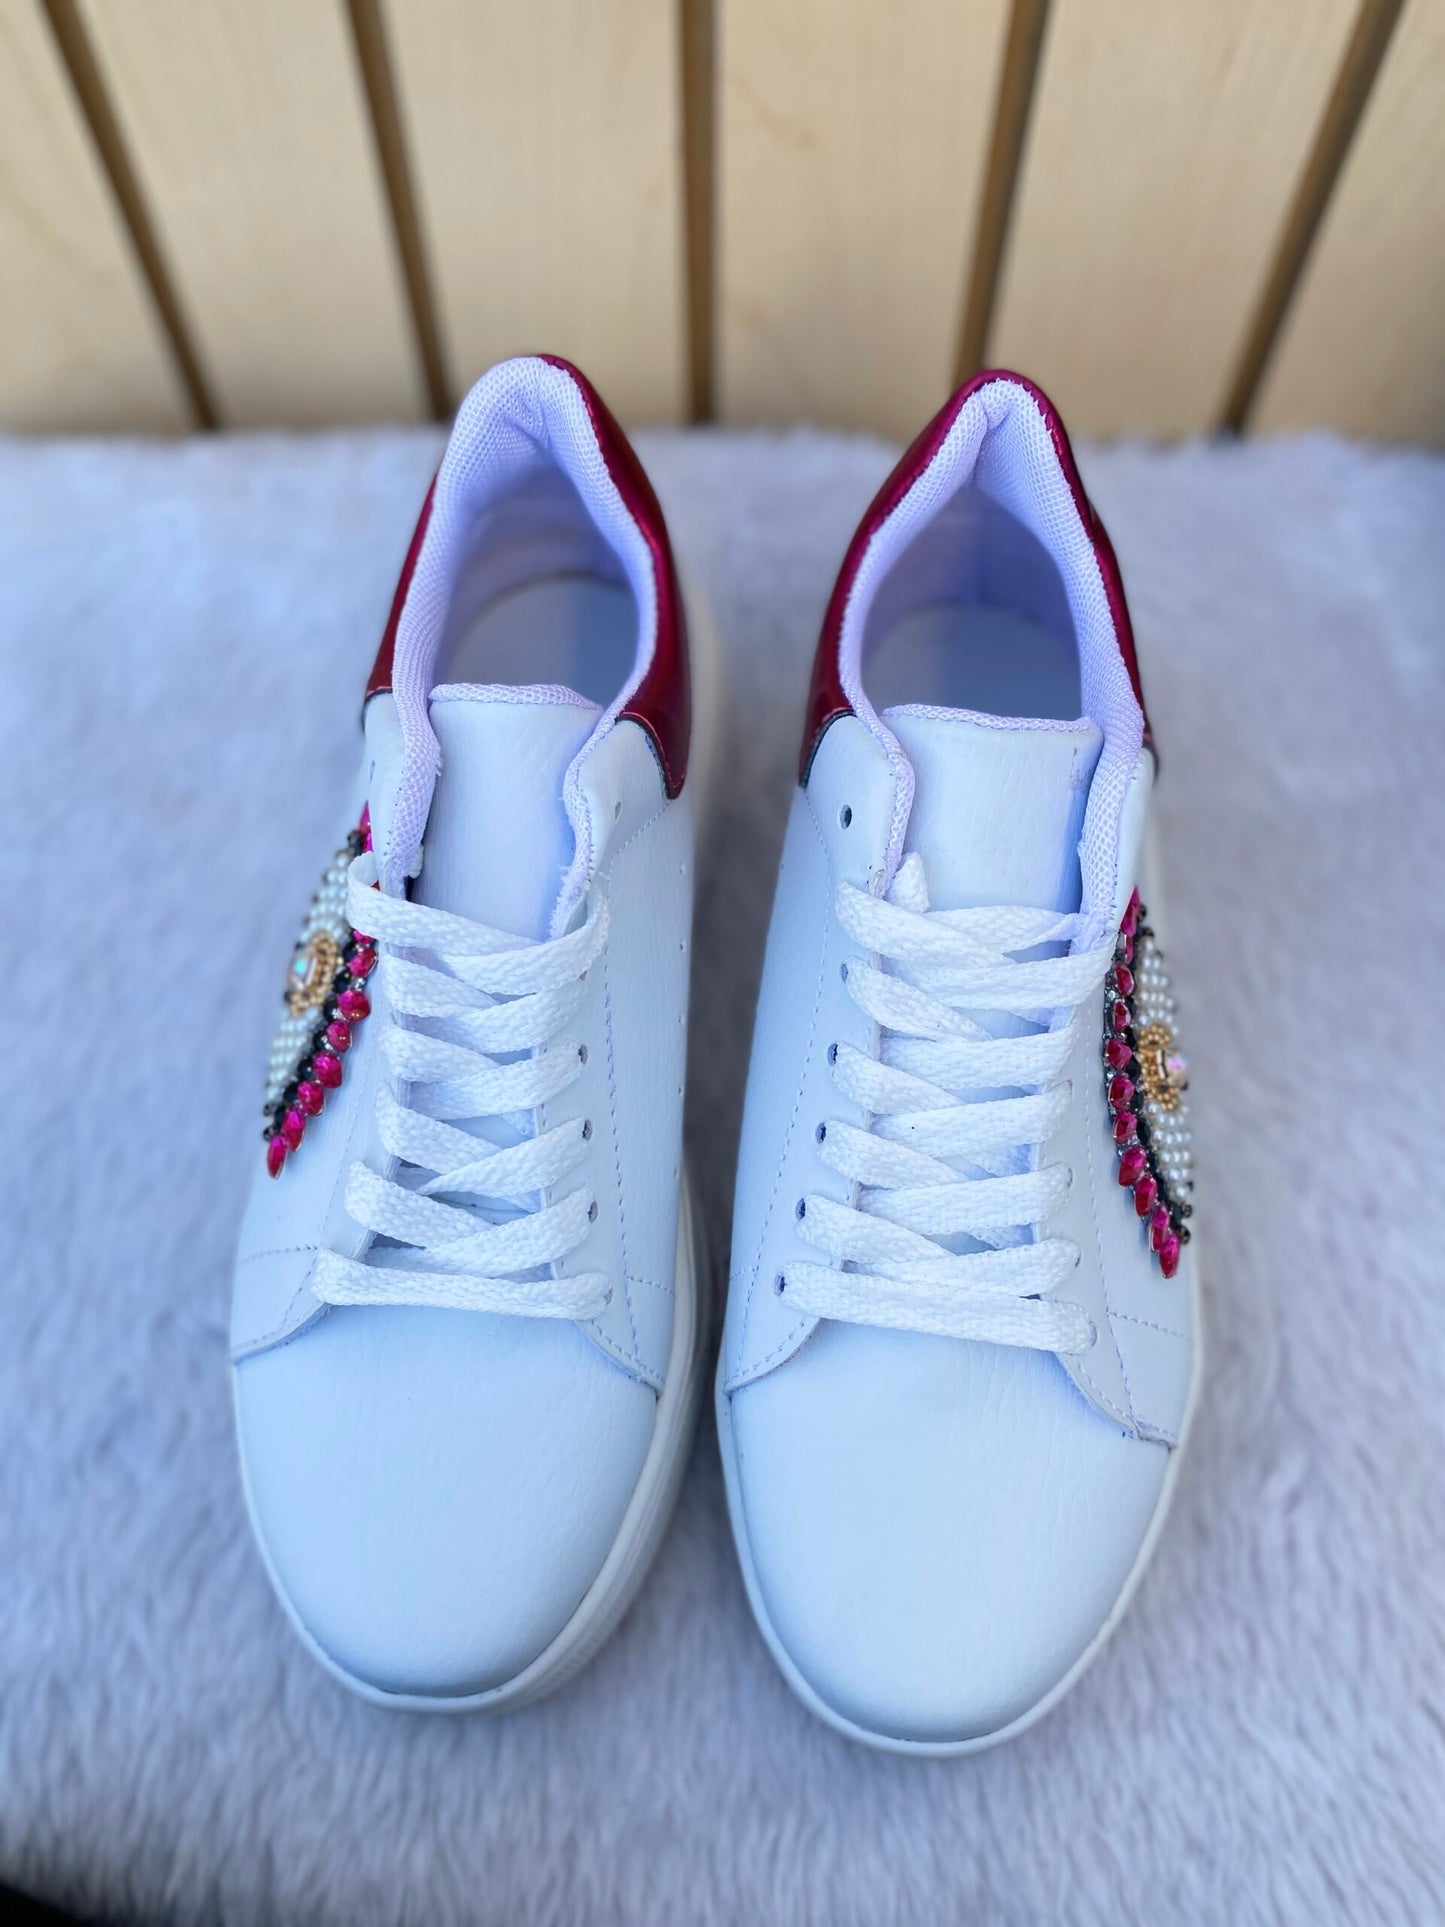 Sneakers white & Pink